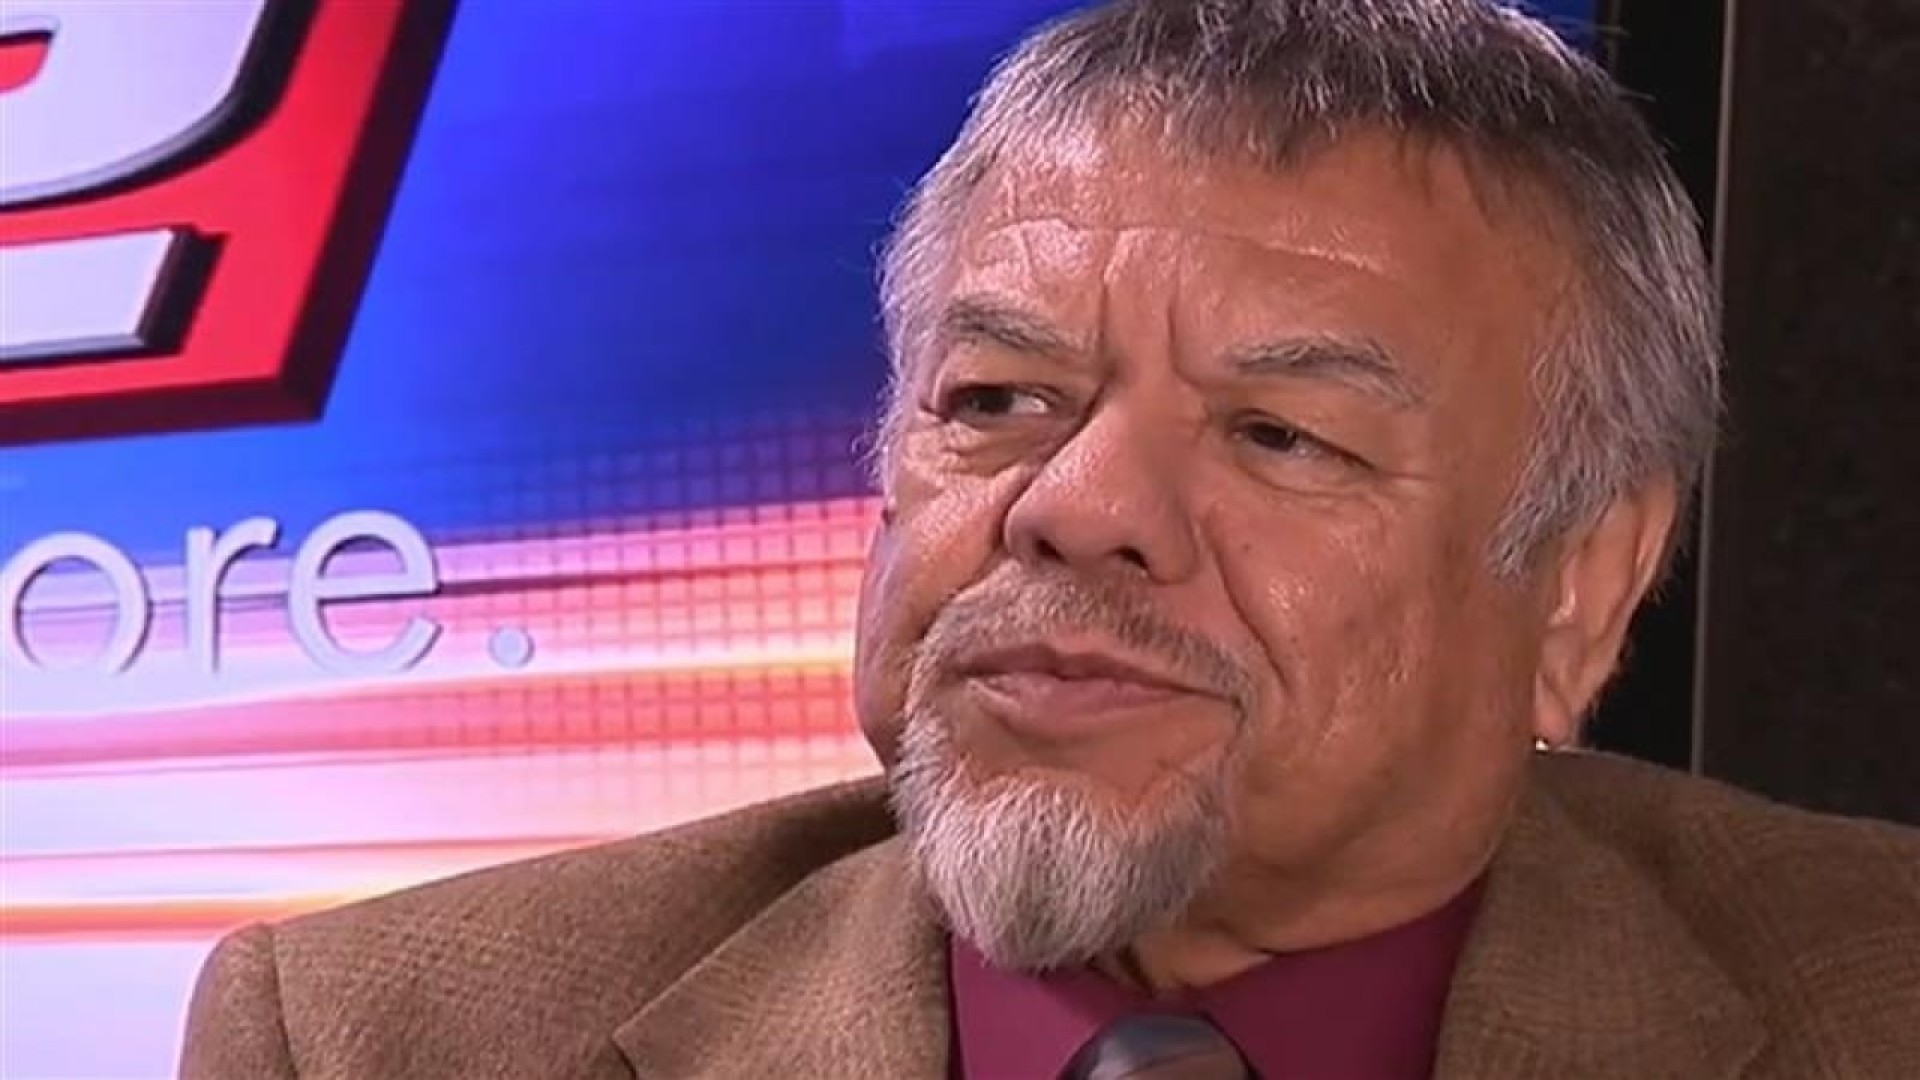 Catching up with Tejano music icon Little Joe after his battle